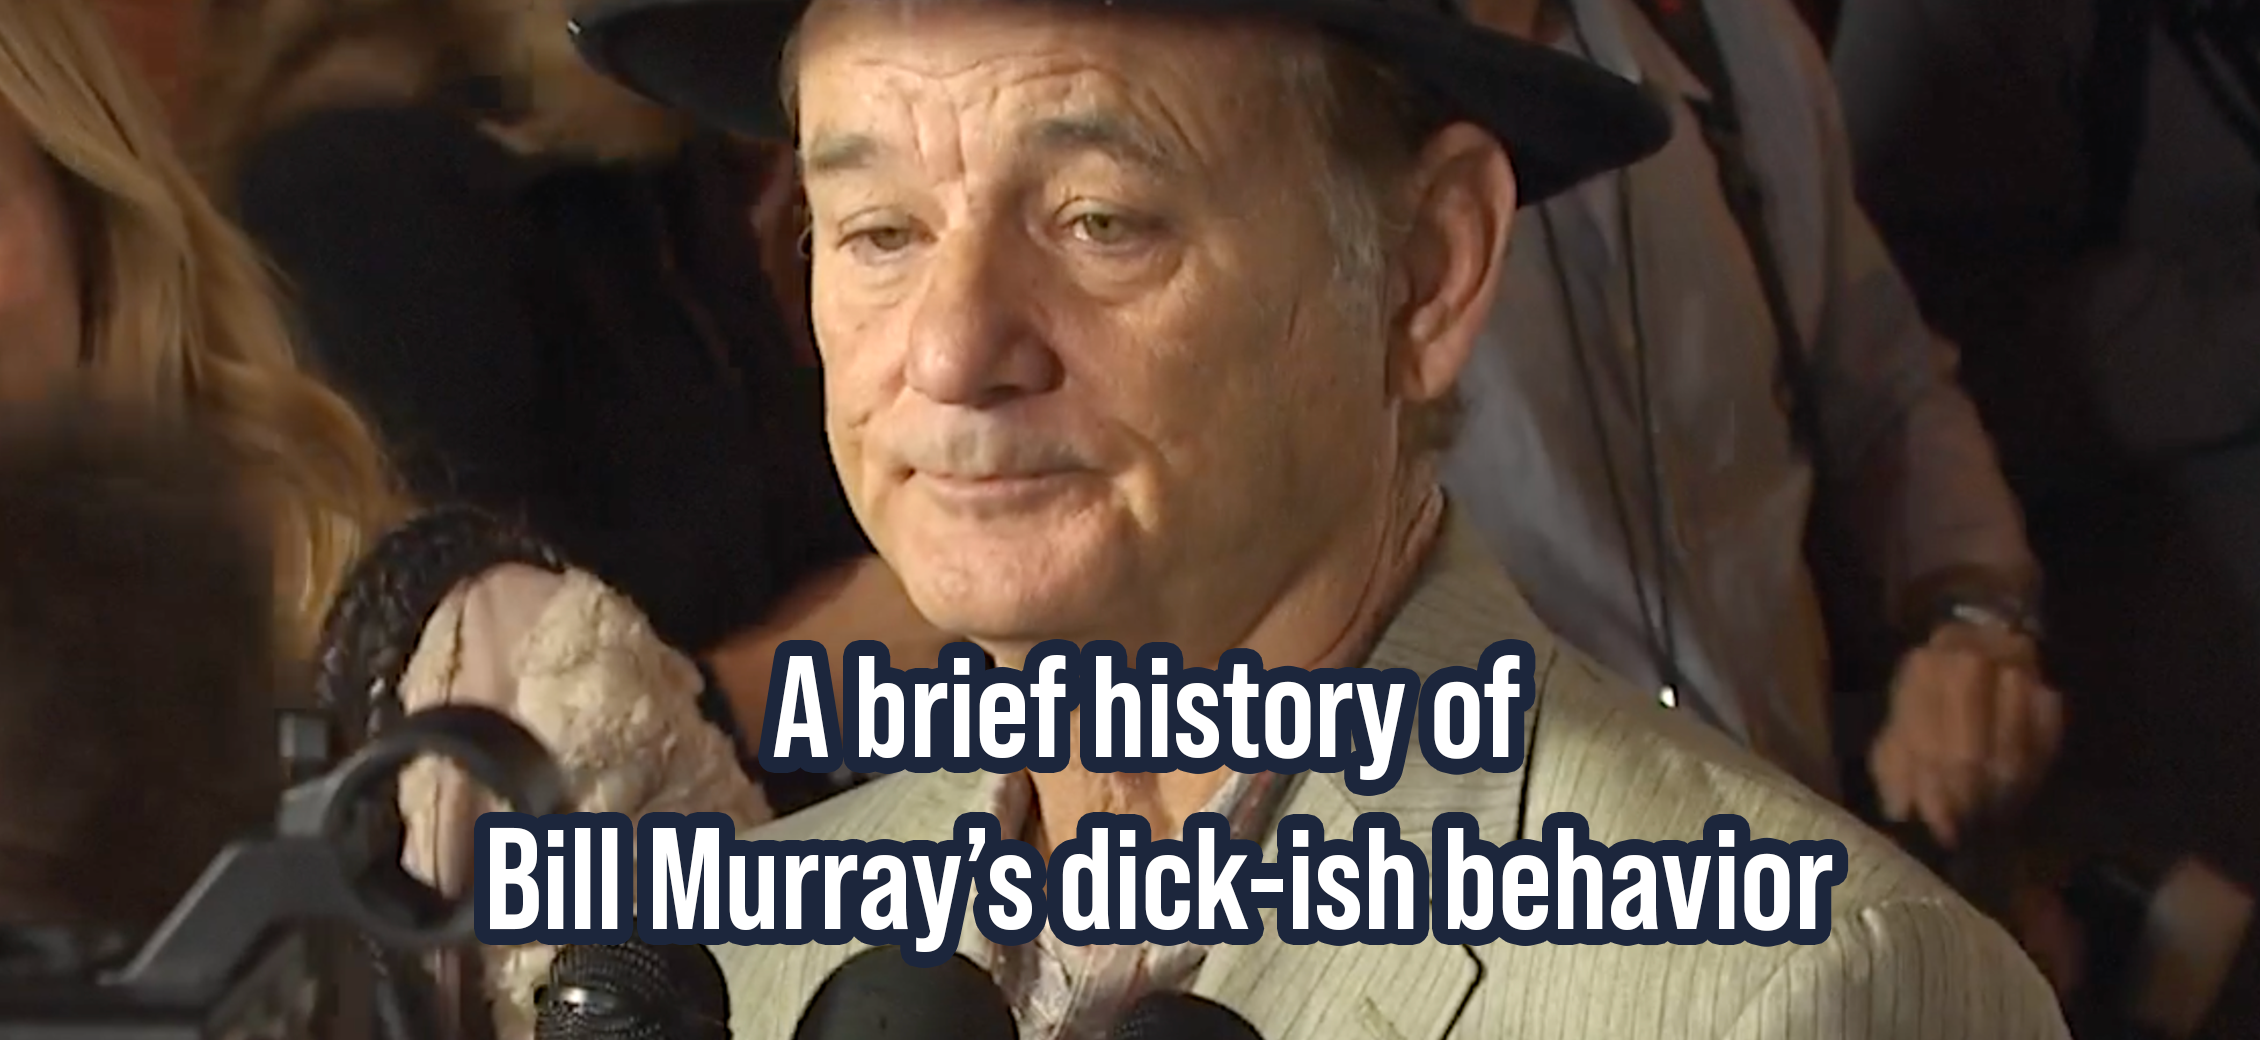 A brief history of Bill Murray’s allegedly dick-ish behavior